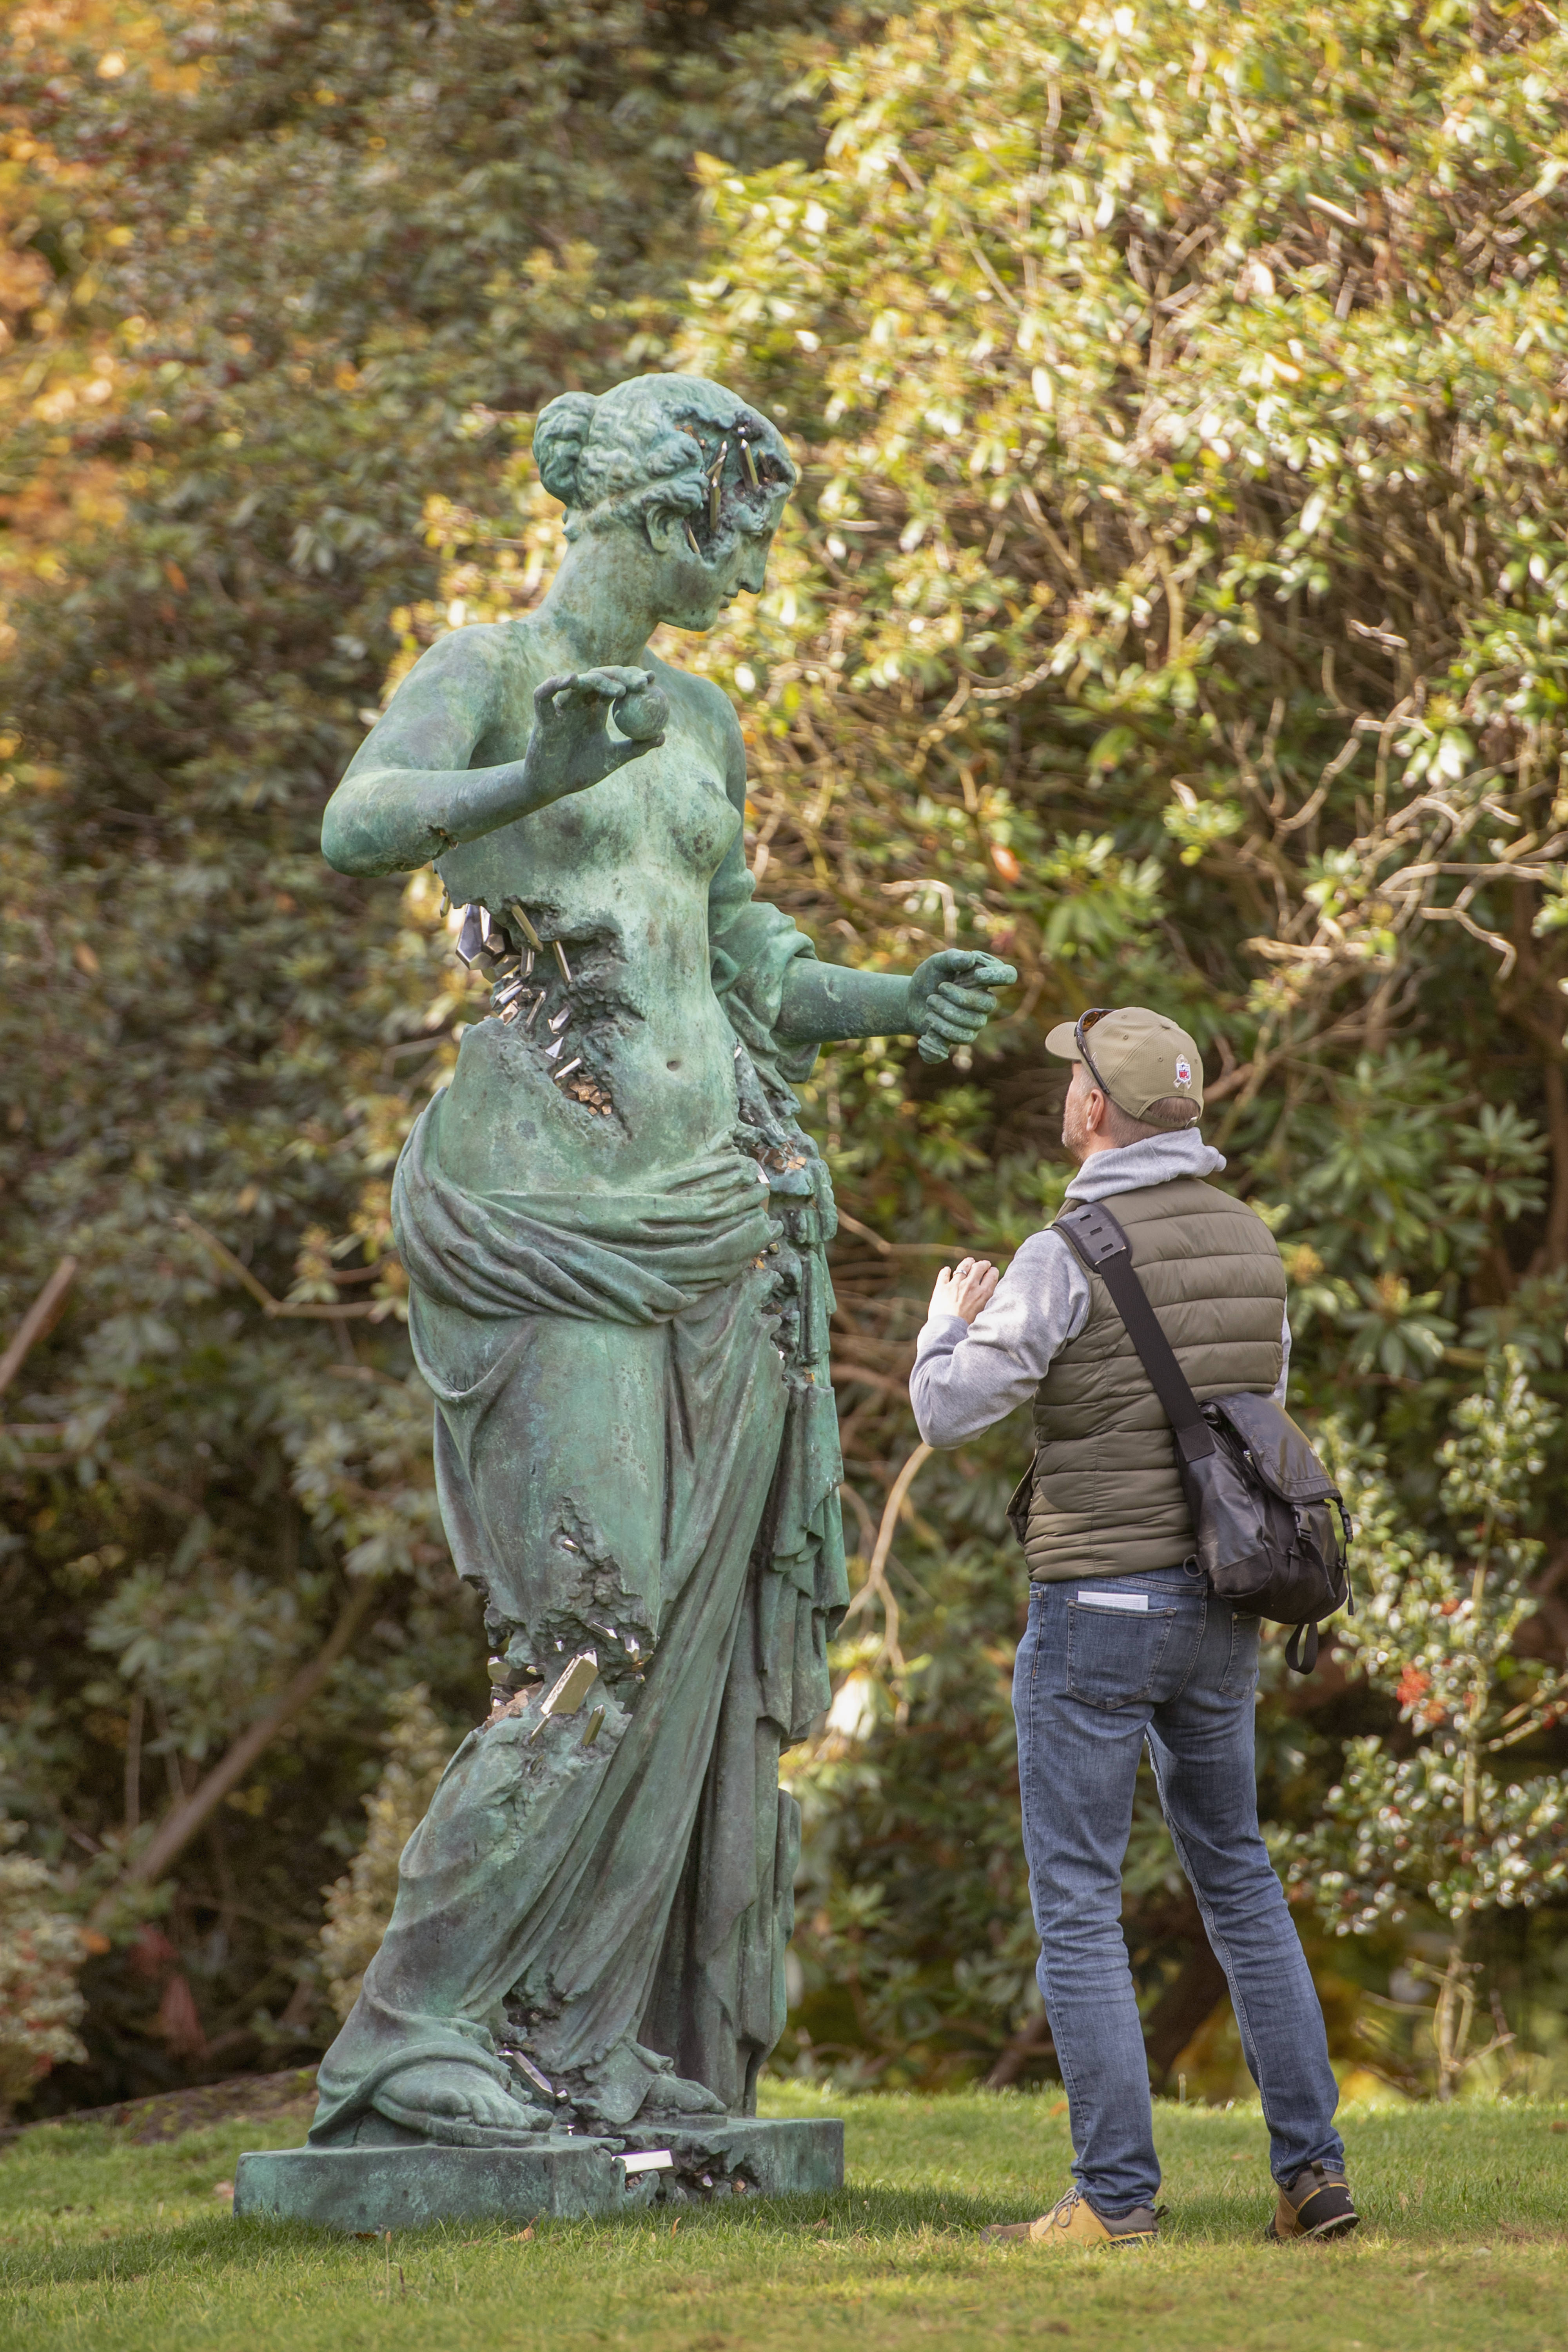 A man taking a photograph of a giant bronze sculpture of a naked woman, with eroded bronze crystallised sections.